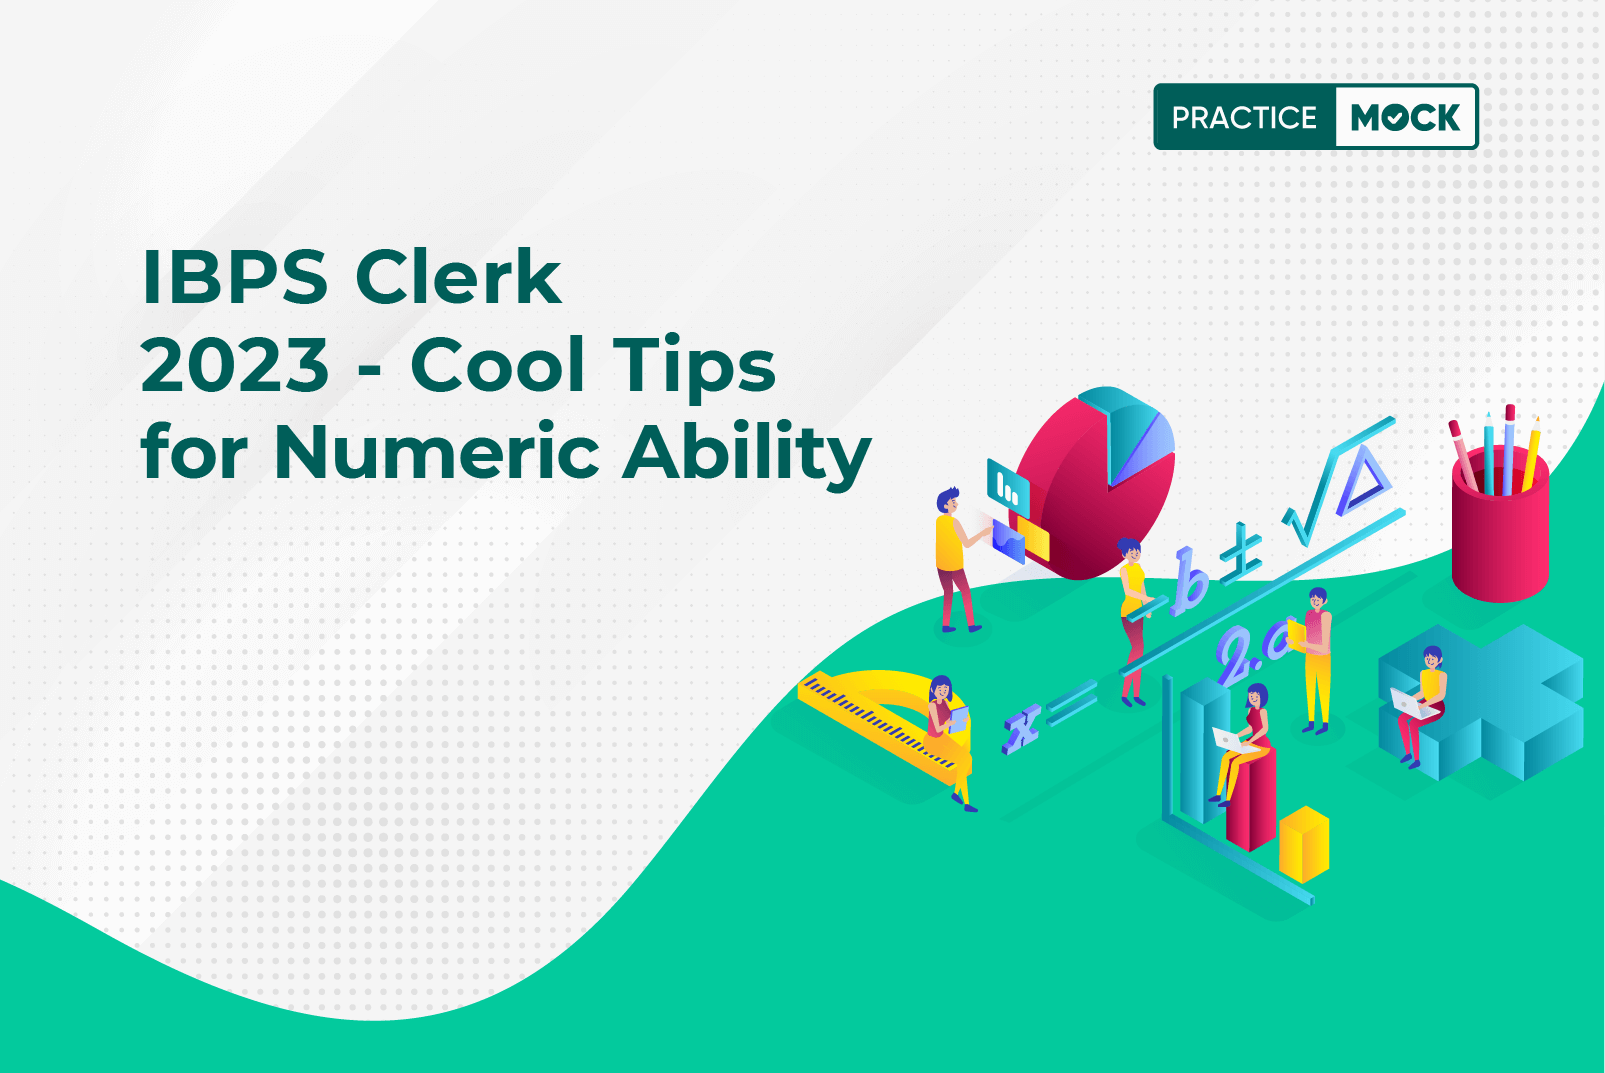 IBPS Clerk 2023 - Cool Tips for Numeric Ability